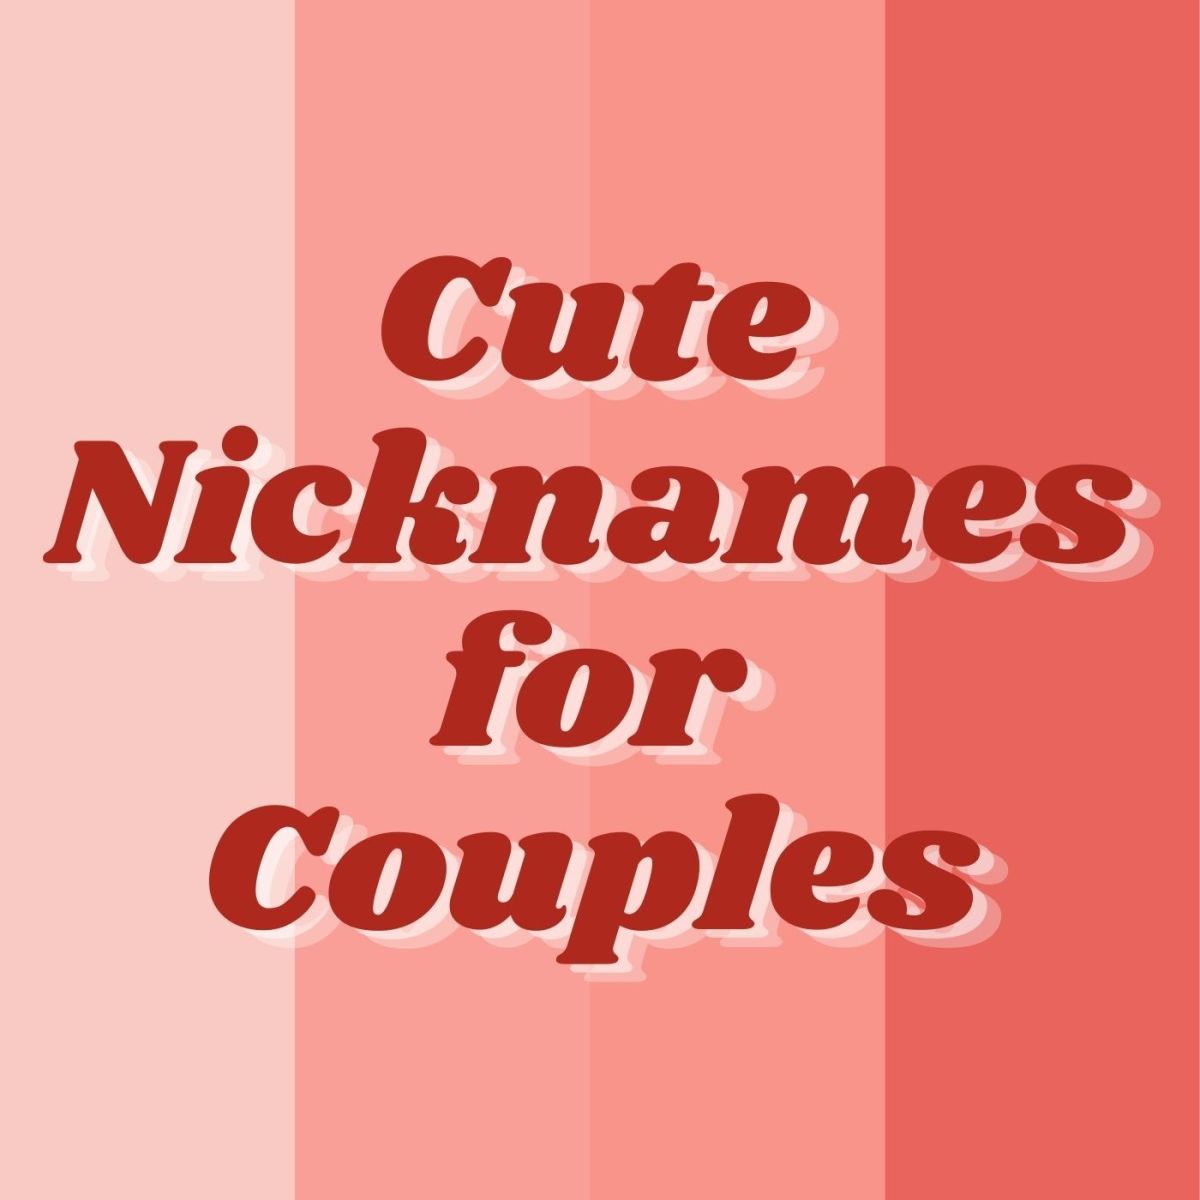 Cute and Funny Nicknames for Couples